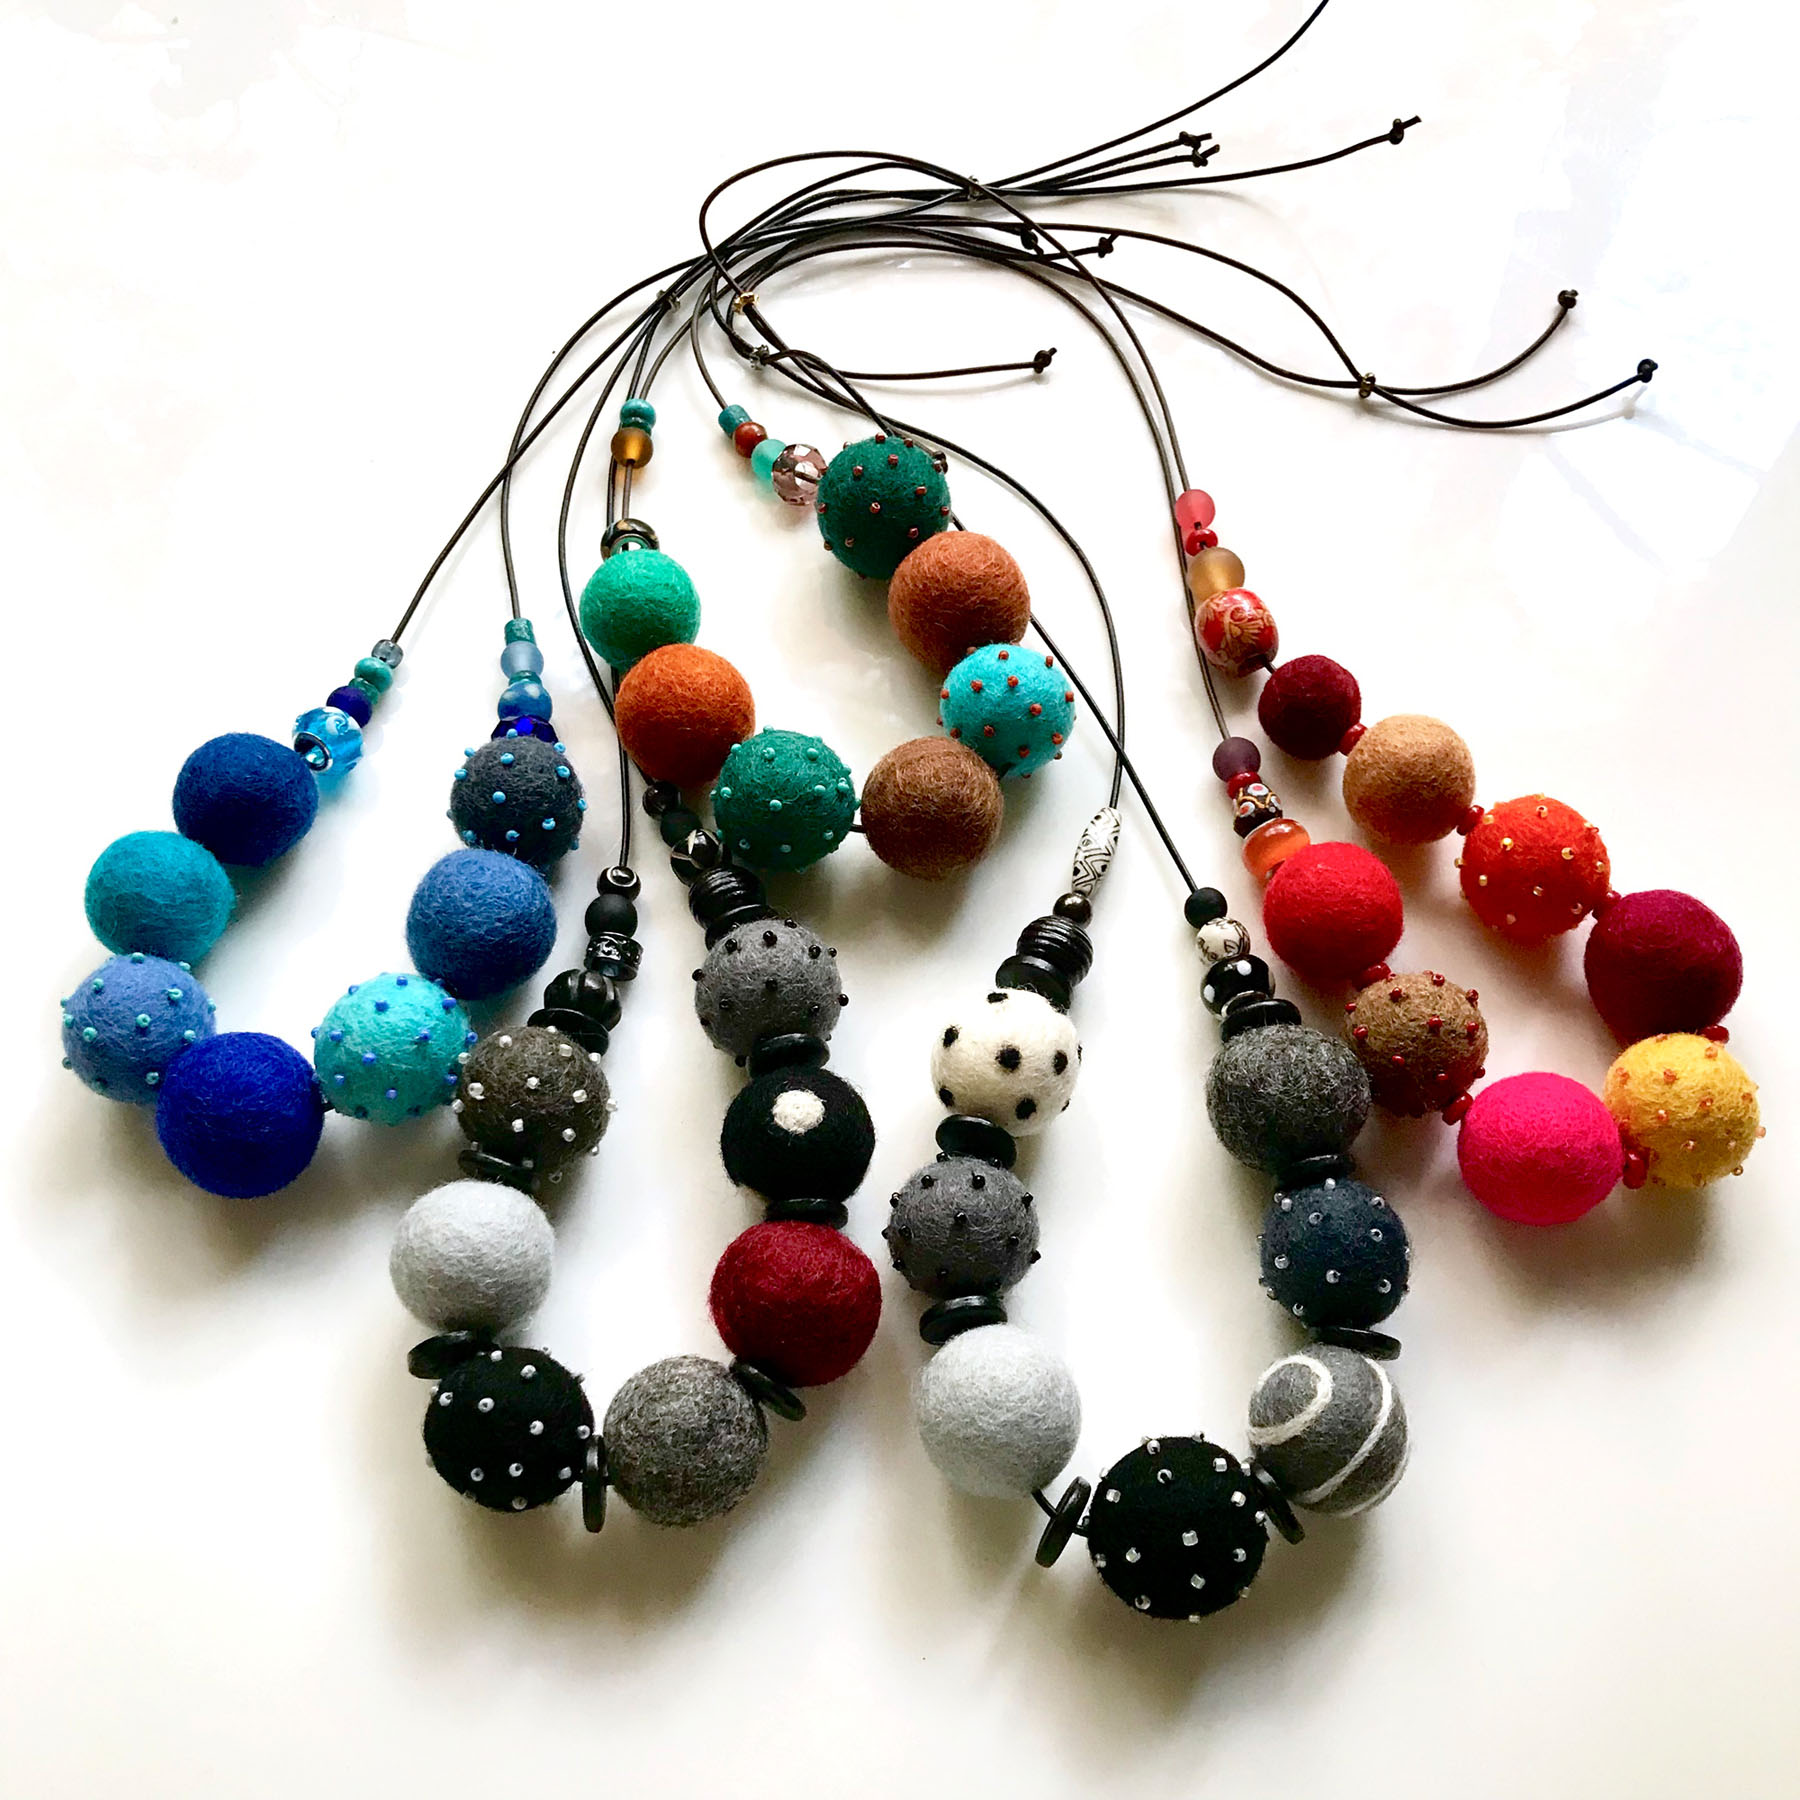 Two-Son-Jewelry-Felted-Necklace